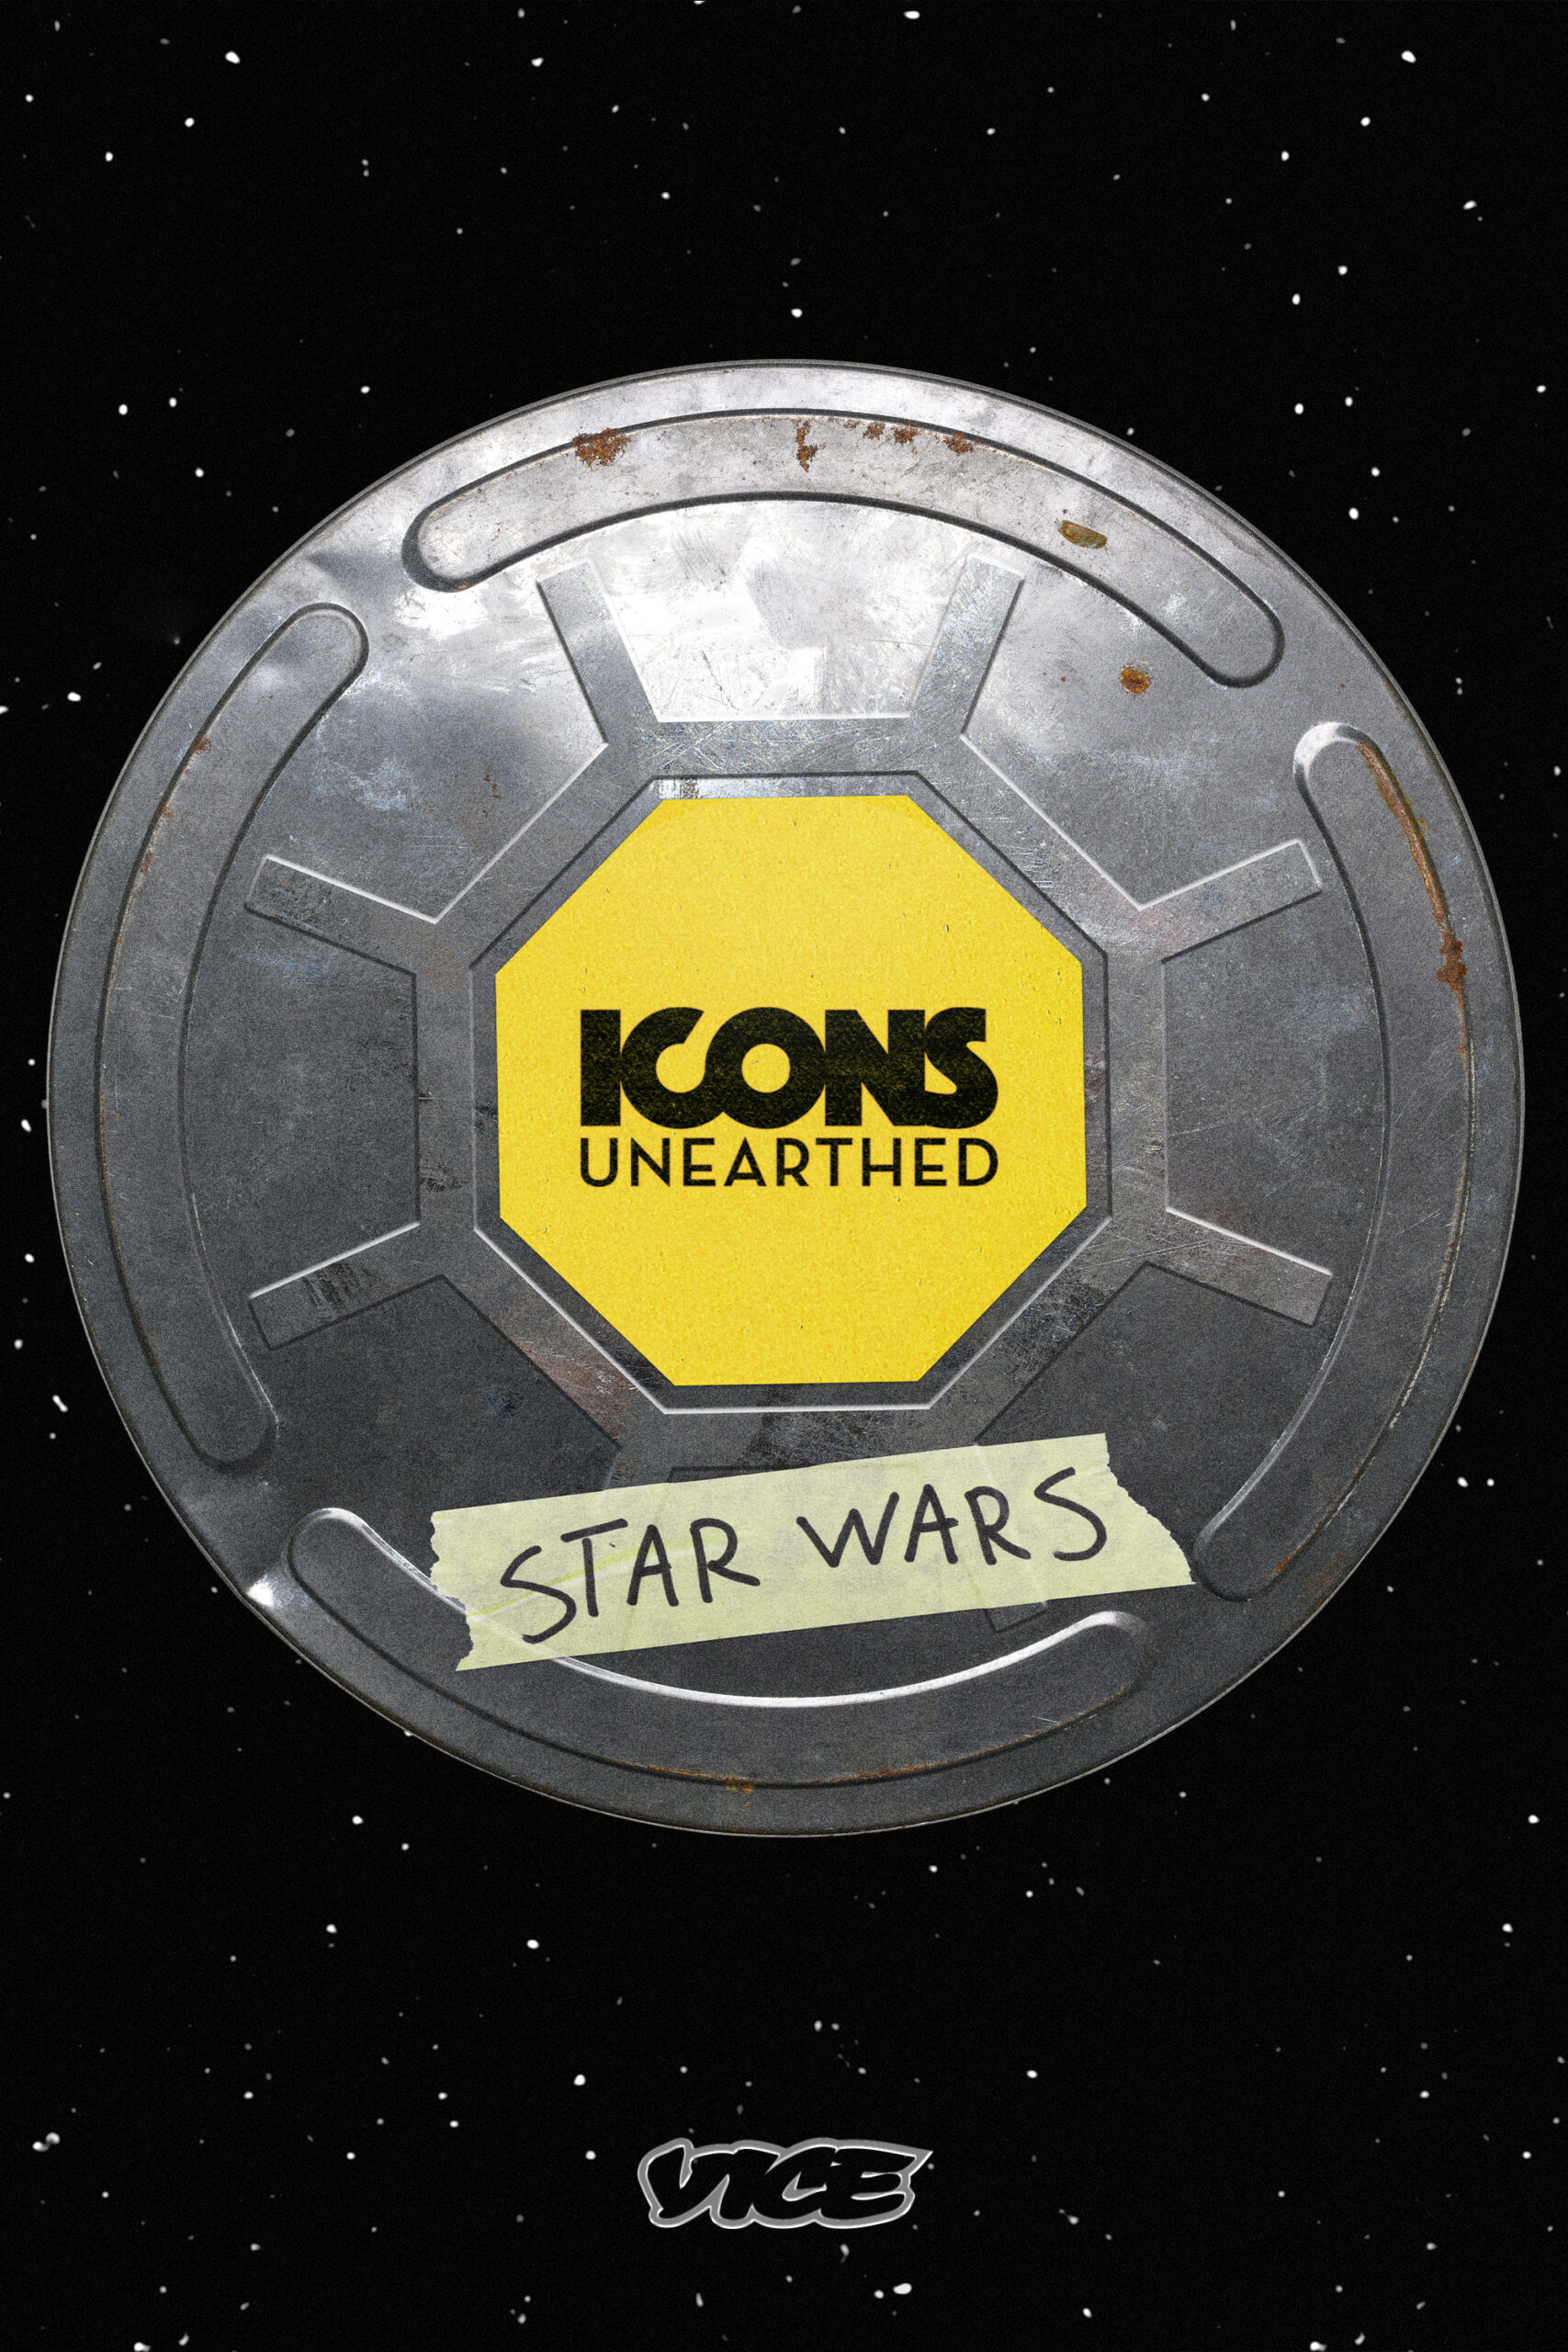 Icons Unearthed Episode 5 Release Date